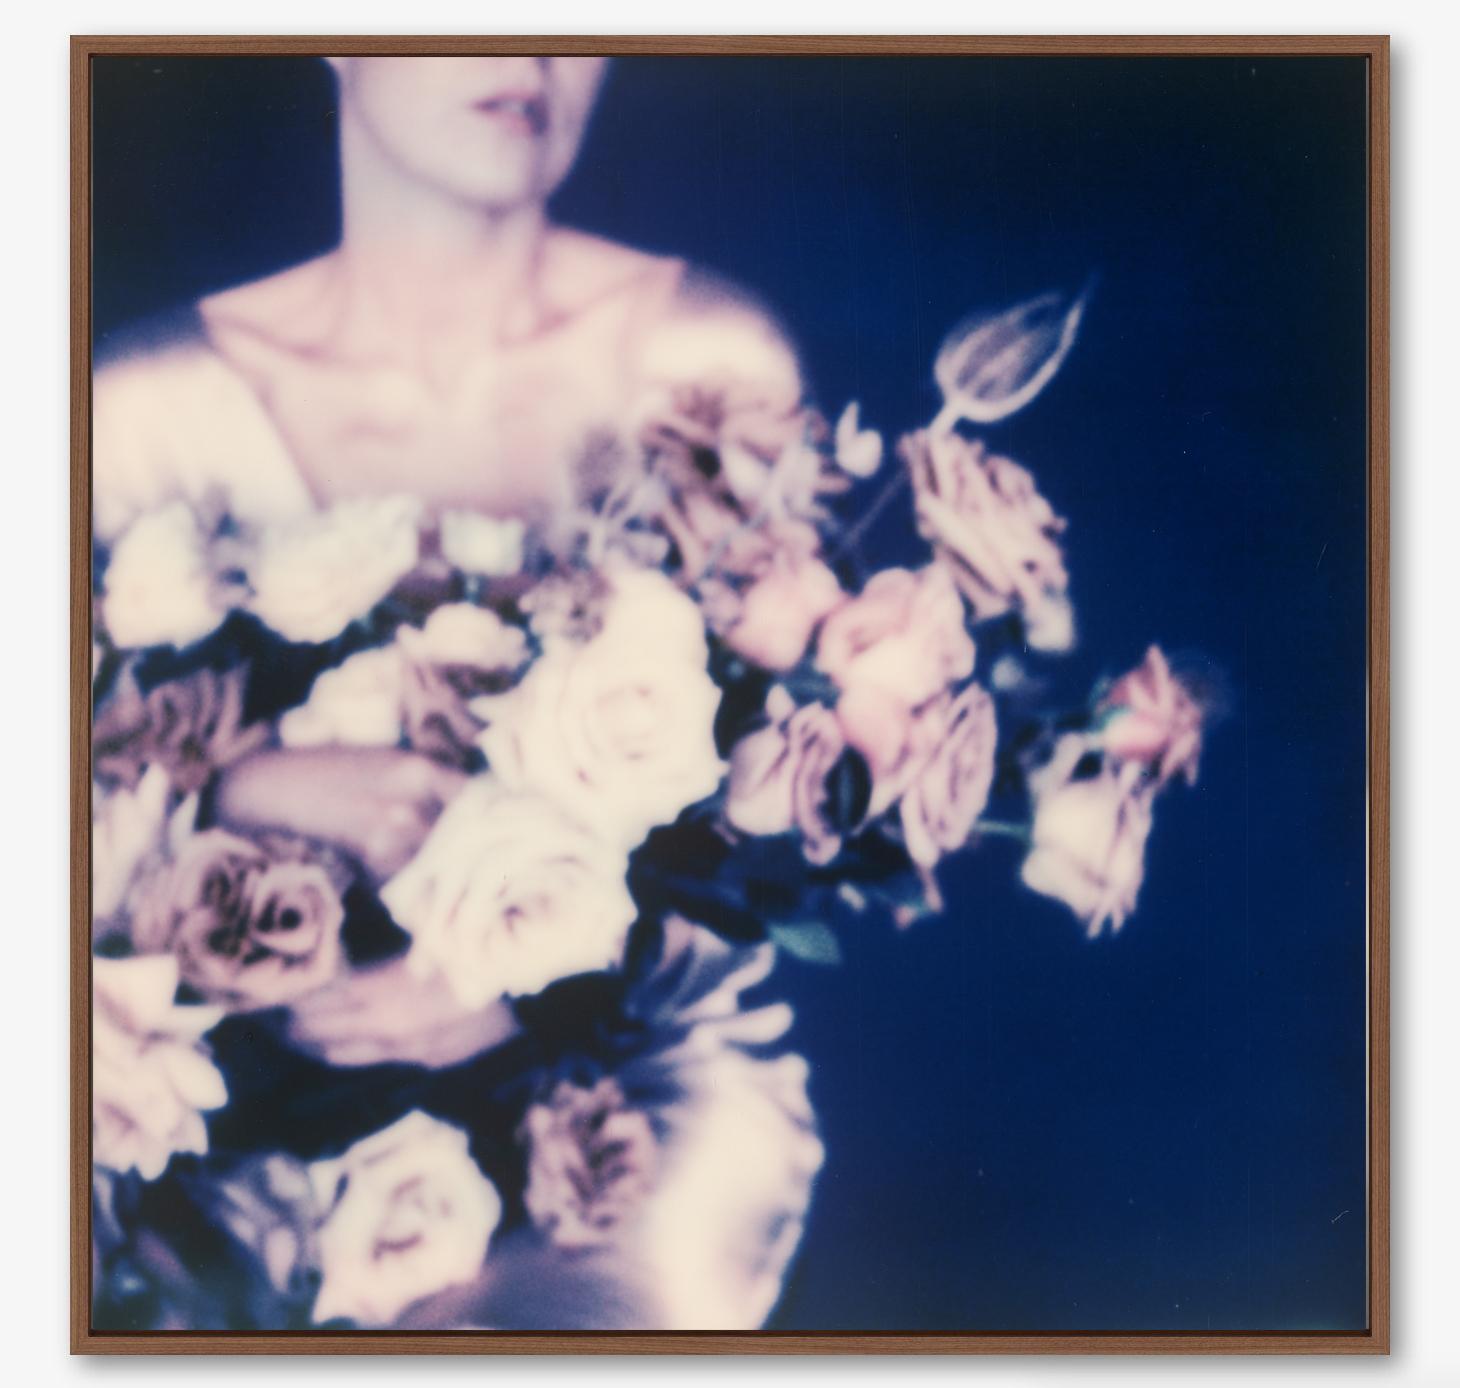 Part of the BLOOMY VIEW series taken in Bern 2020 in collaboration with Heym Collections, the images gained new life in their ambiguity, which often stimulates the viewer to project their own thoughts onto the images objectivity.

Taken on Polaroid,